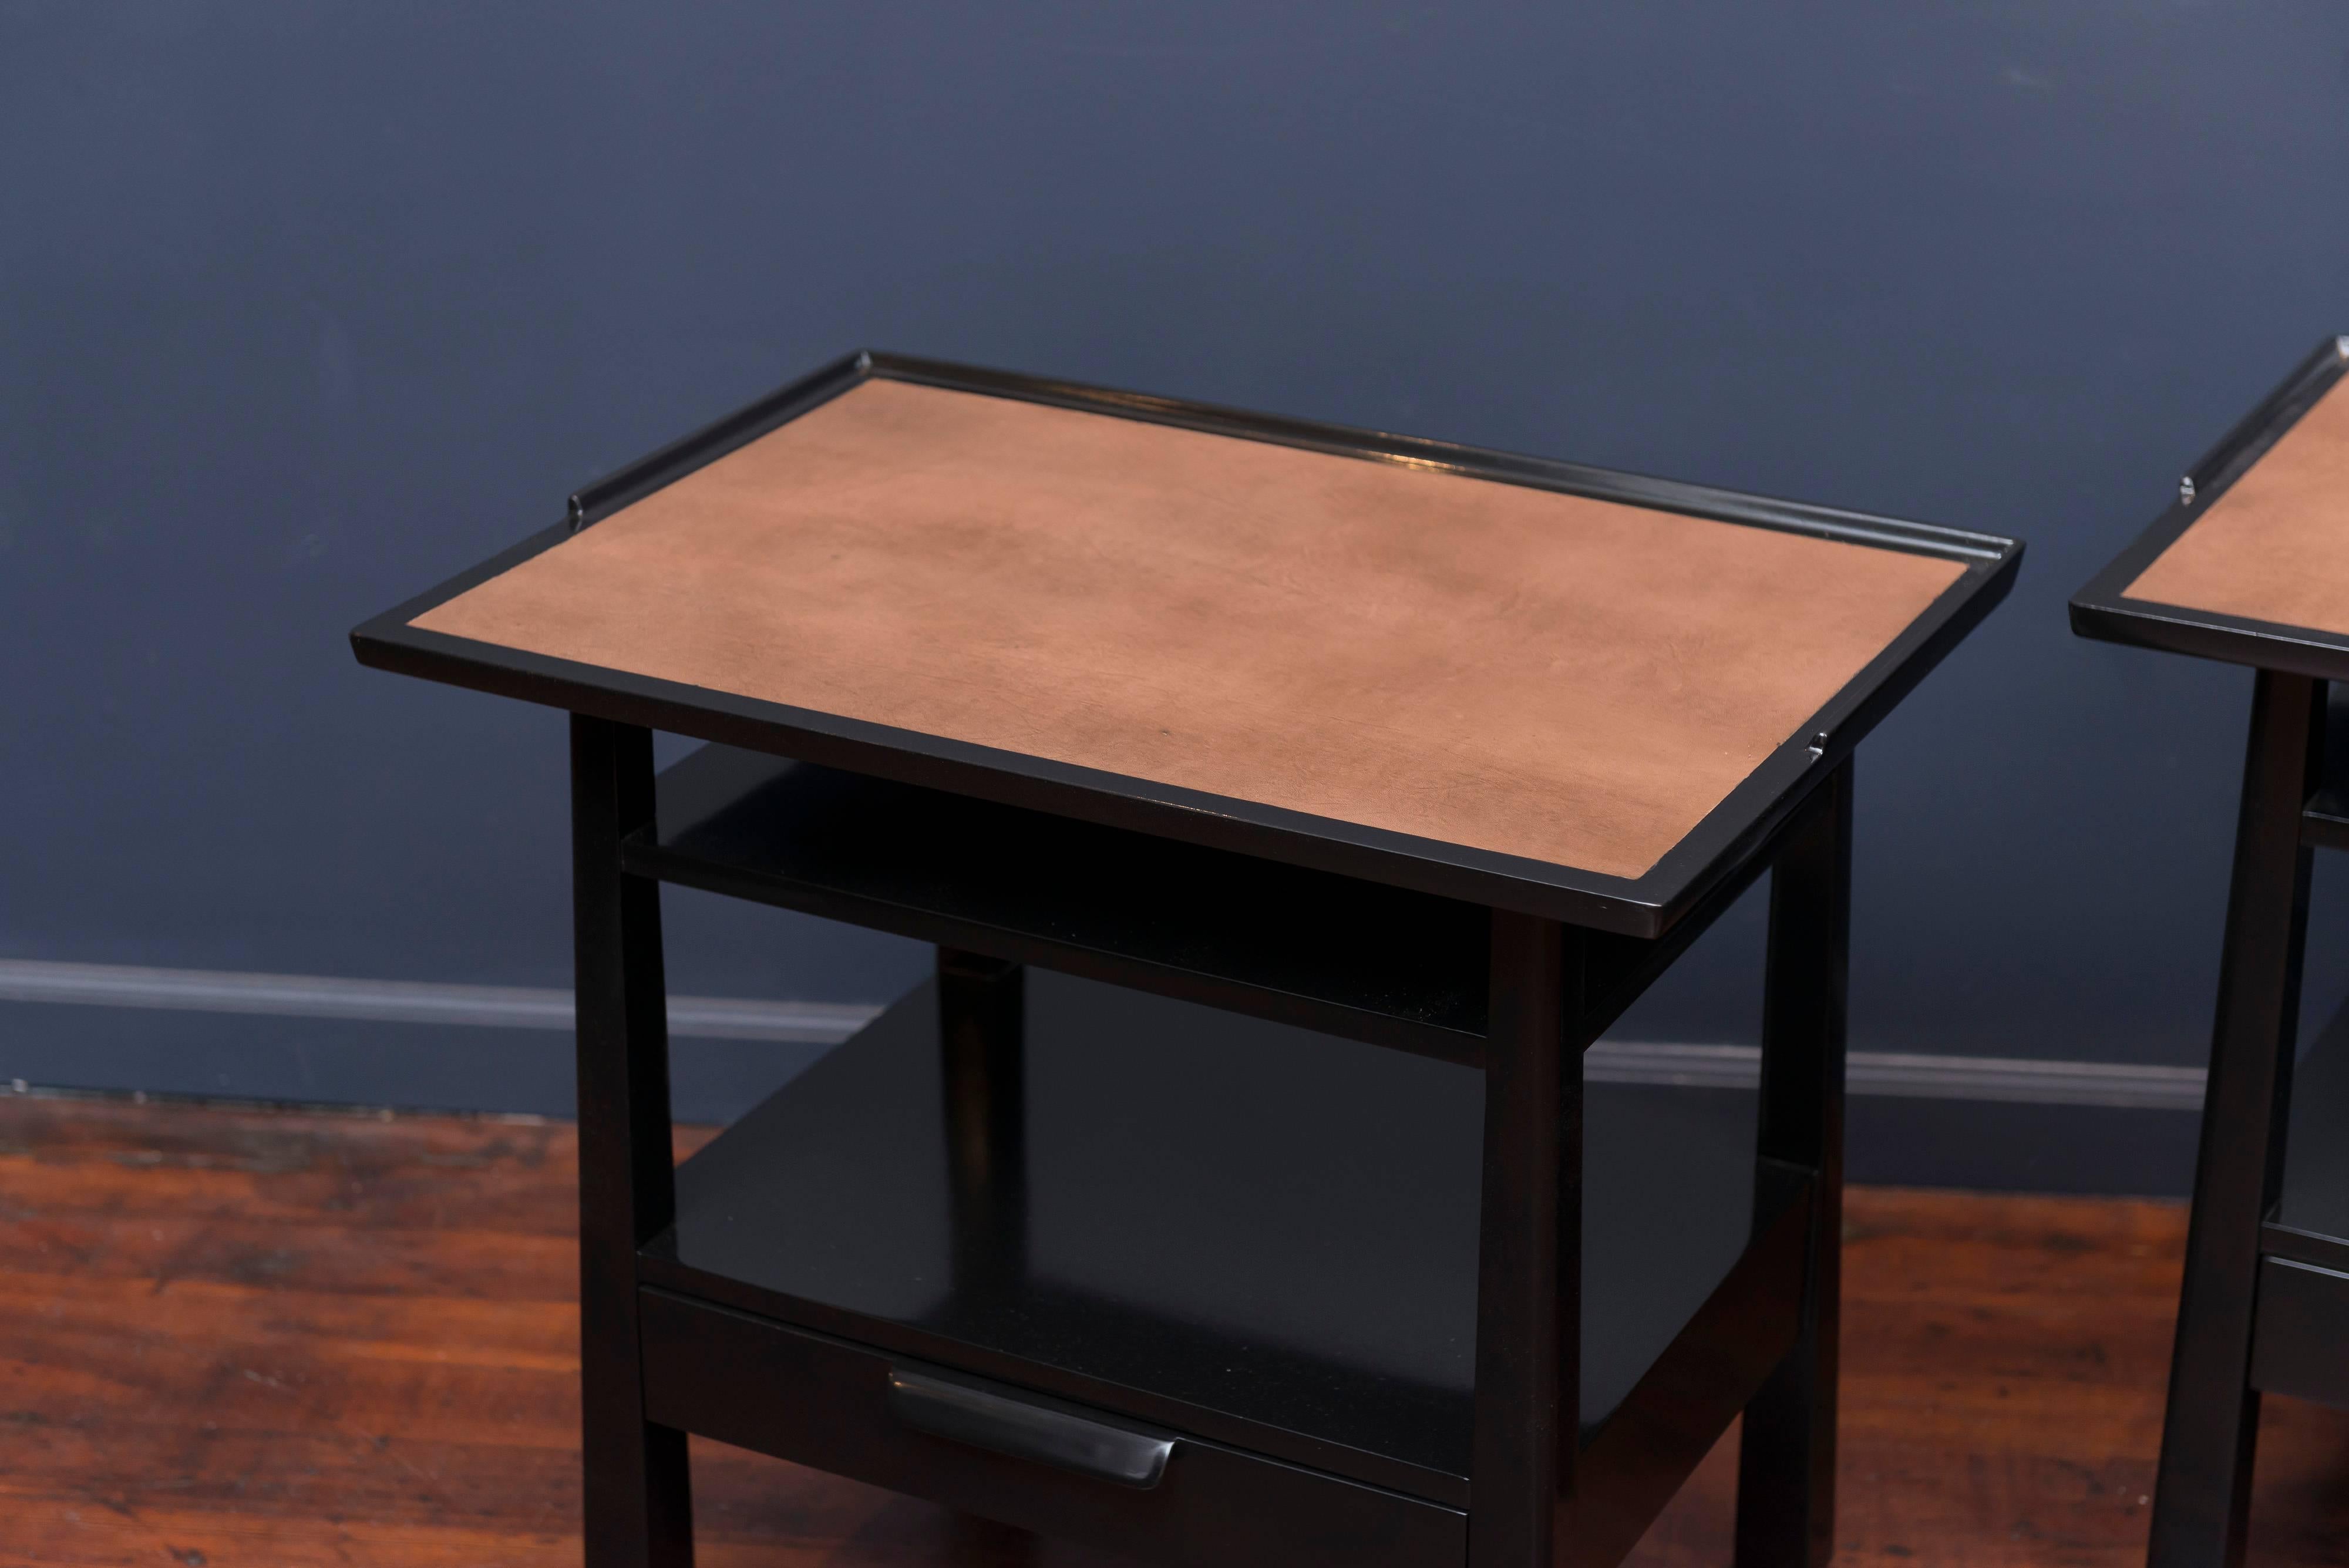 Pair of Edward Wormley design side tables made from solid mahogany with leather insert tops. Sculpted single drawer pull with a gallery trimmed top on tapering legs, newly refinished, labeled.